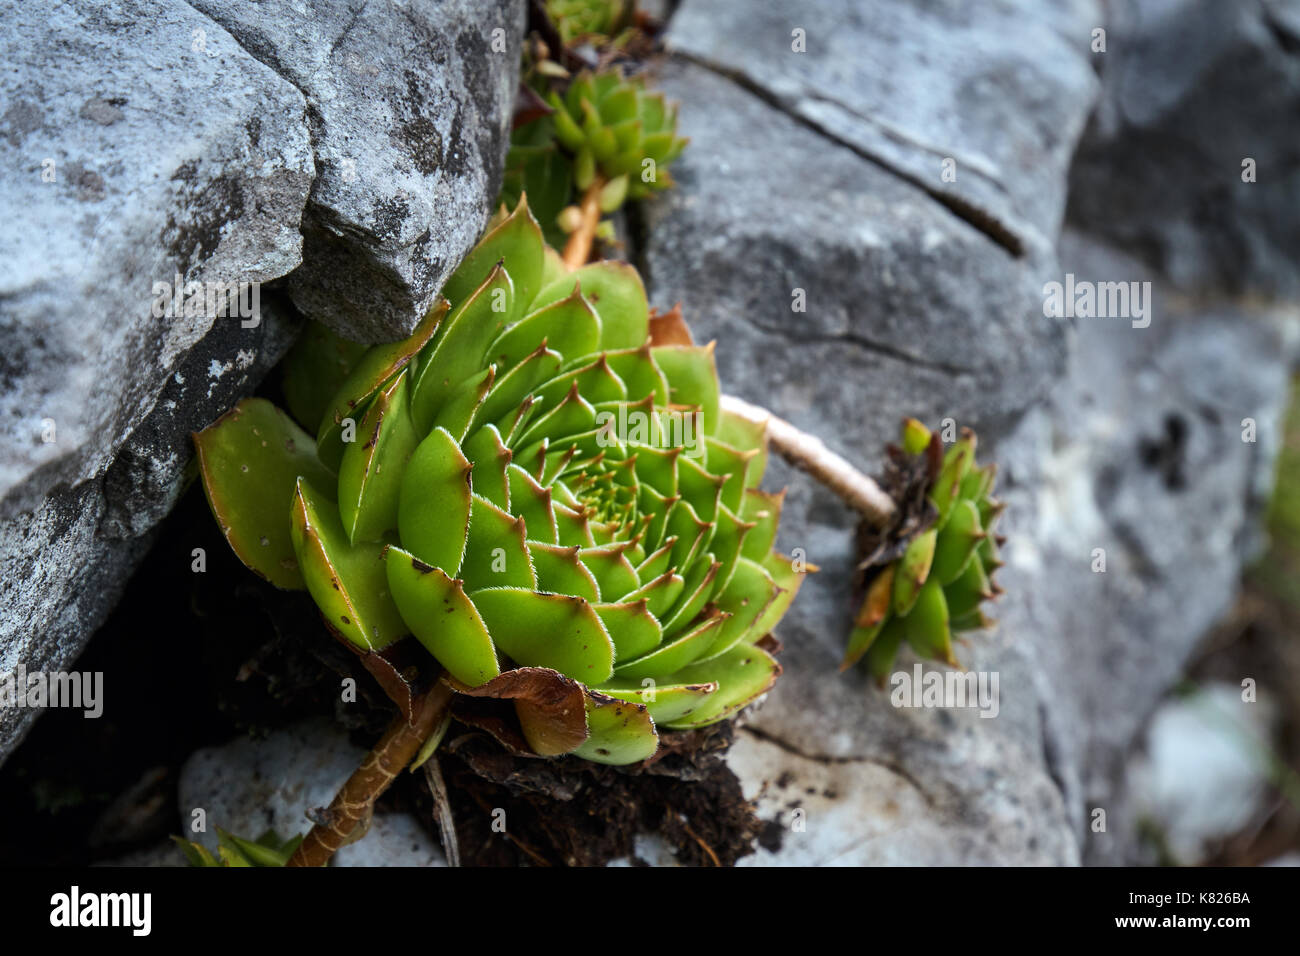 Small aloe vera plant grown between rocks in the mountain Stock Photo